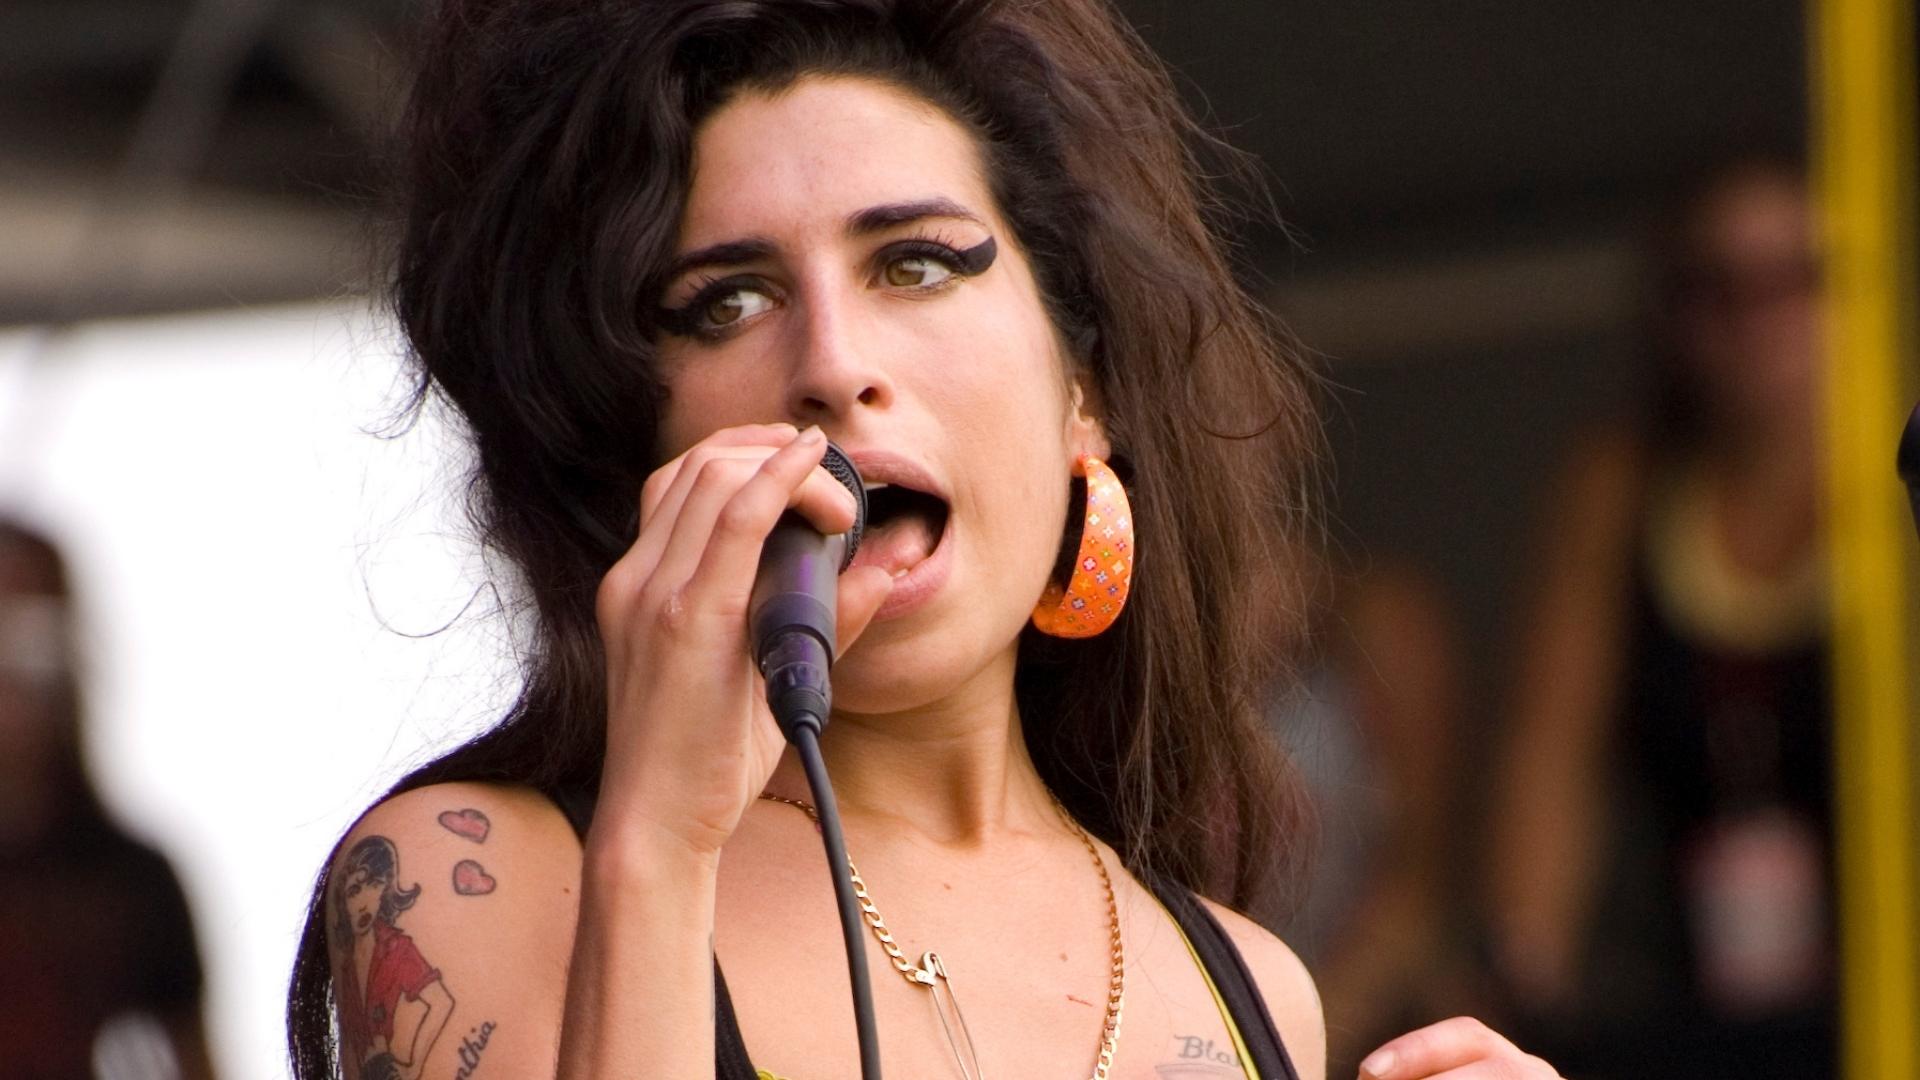 amy winehouse creative commons